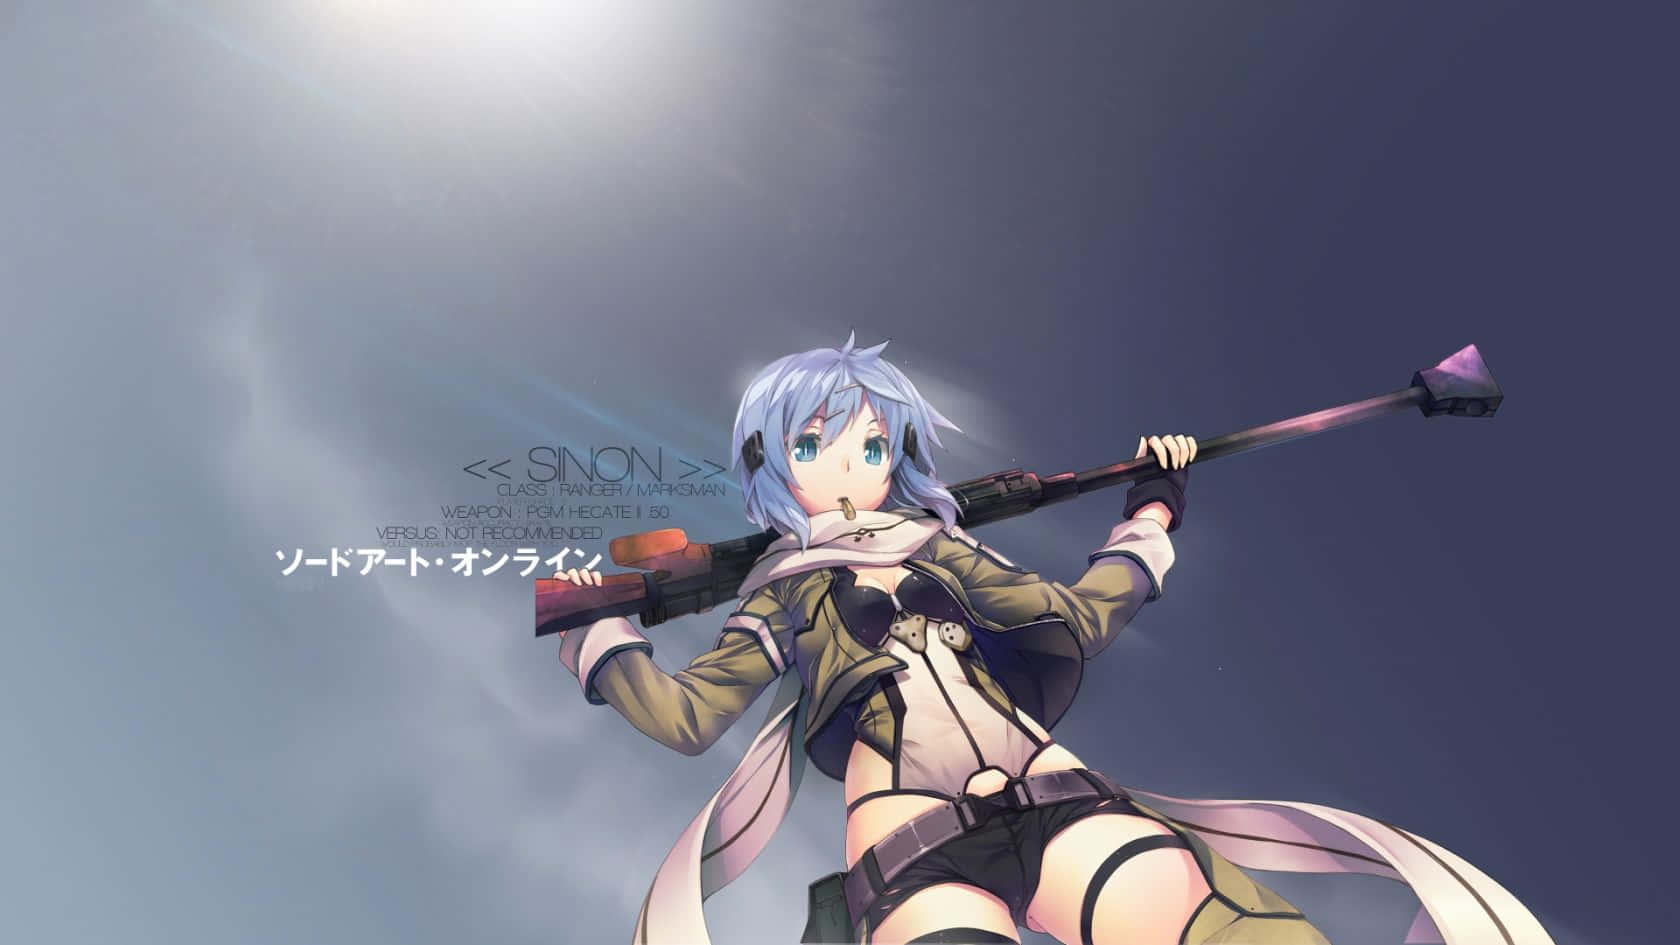 Sinon: The swordsman who stands tall in the world of online gaming Wallpaper